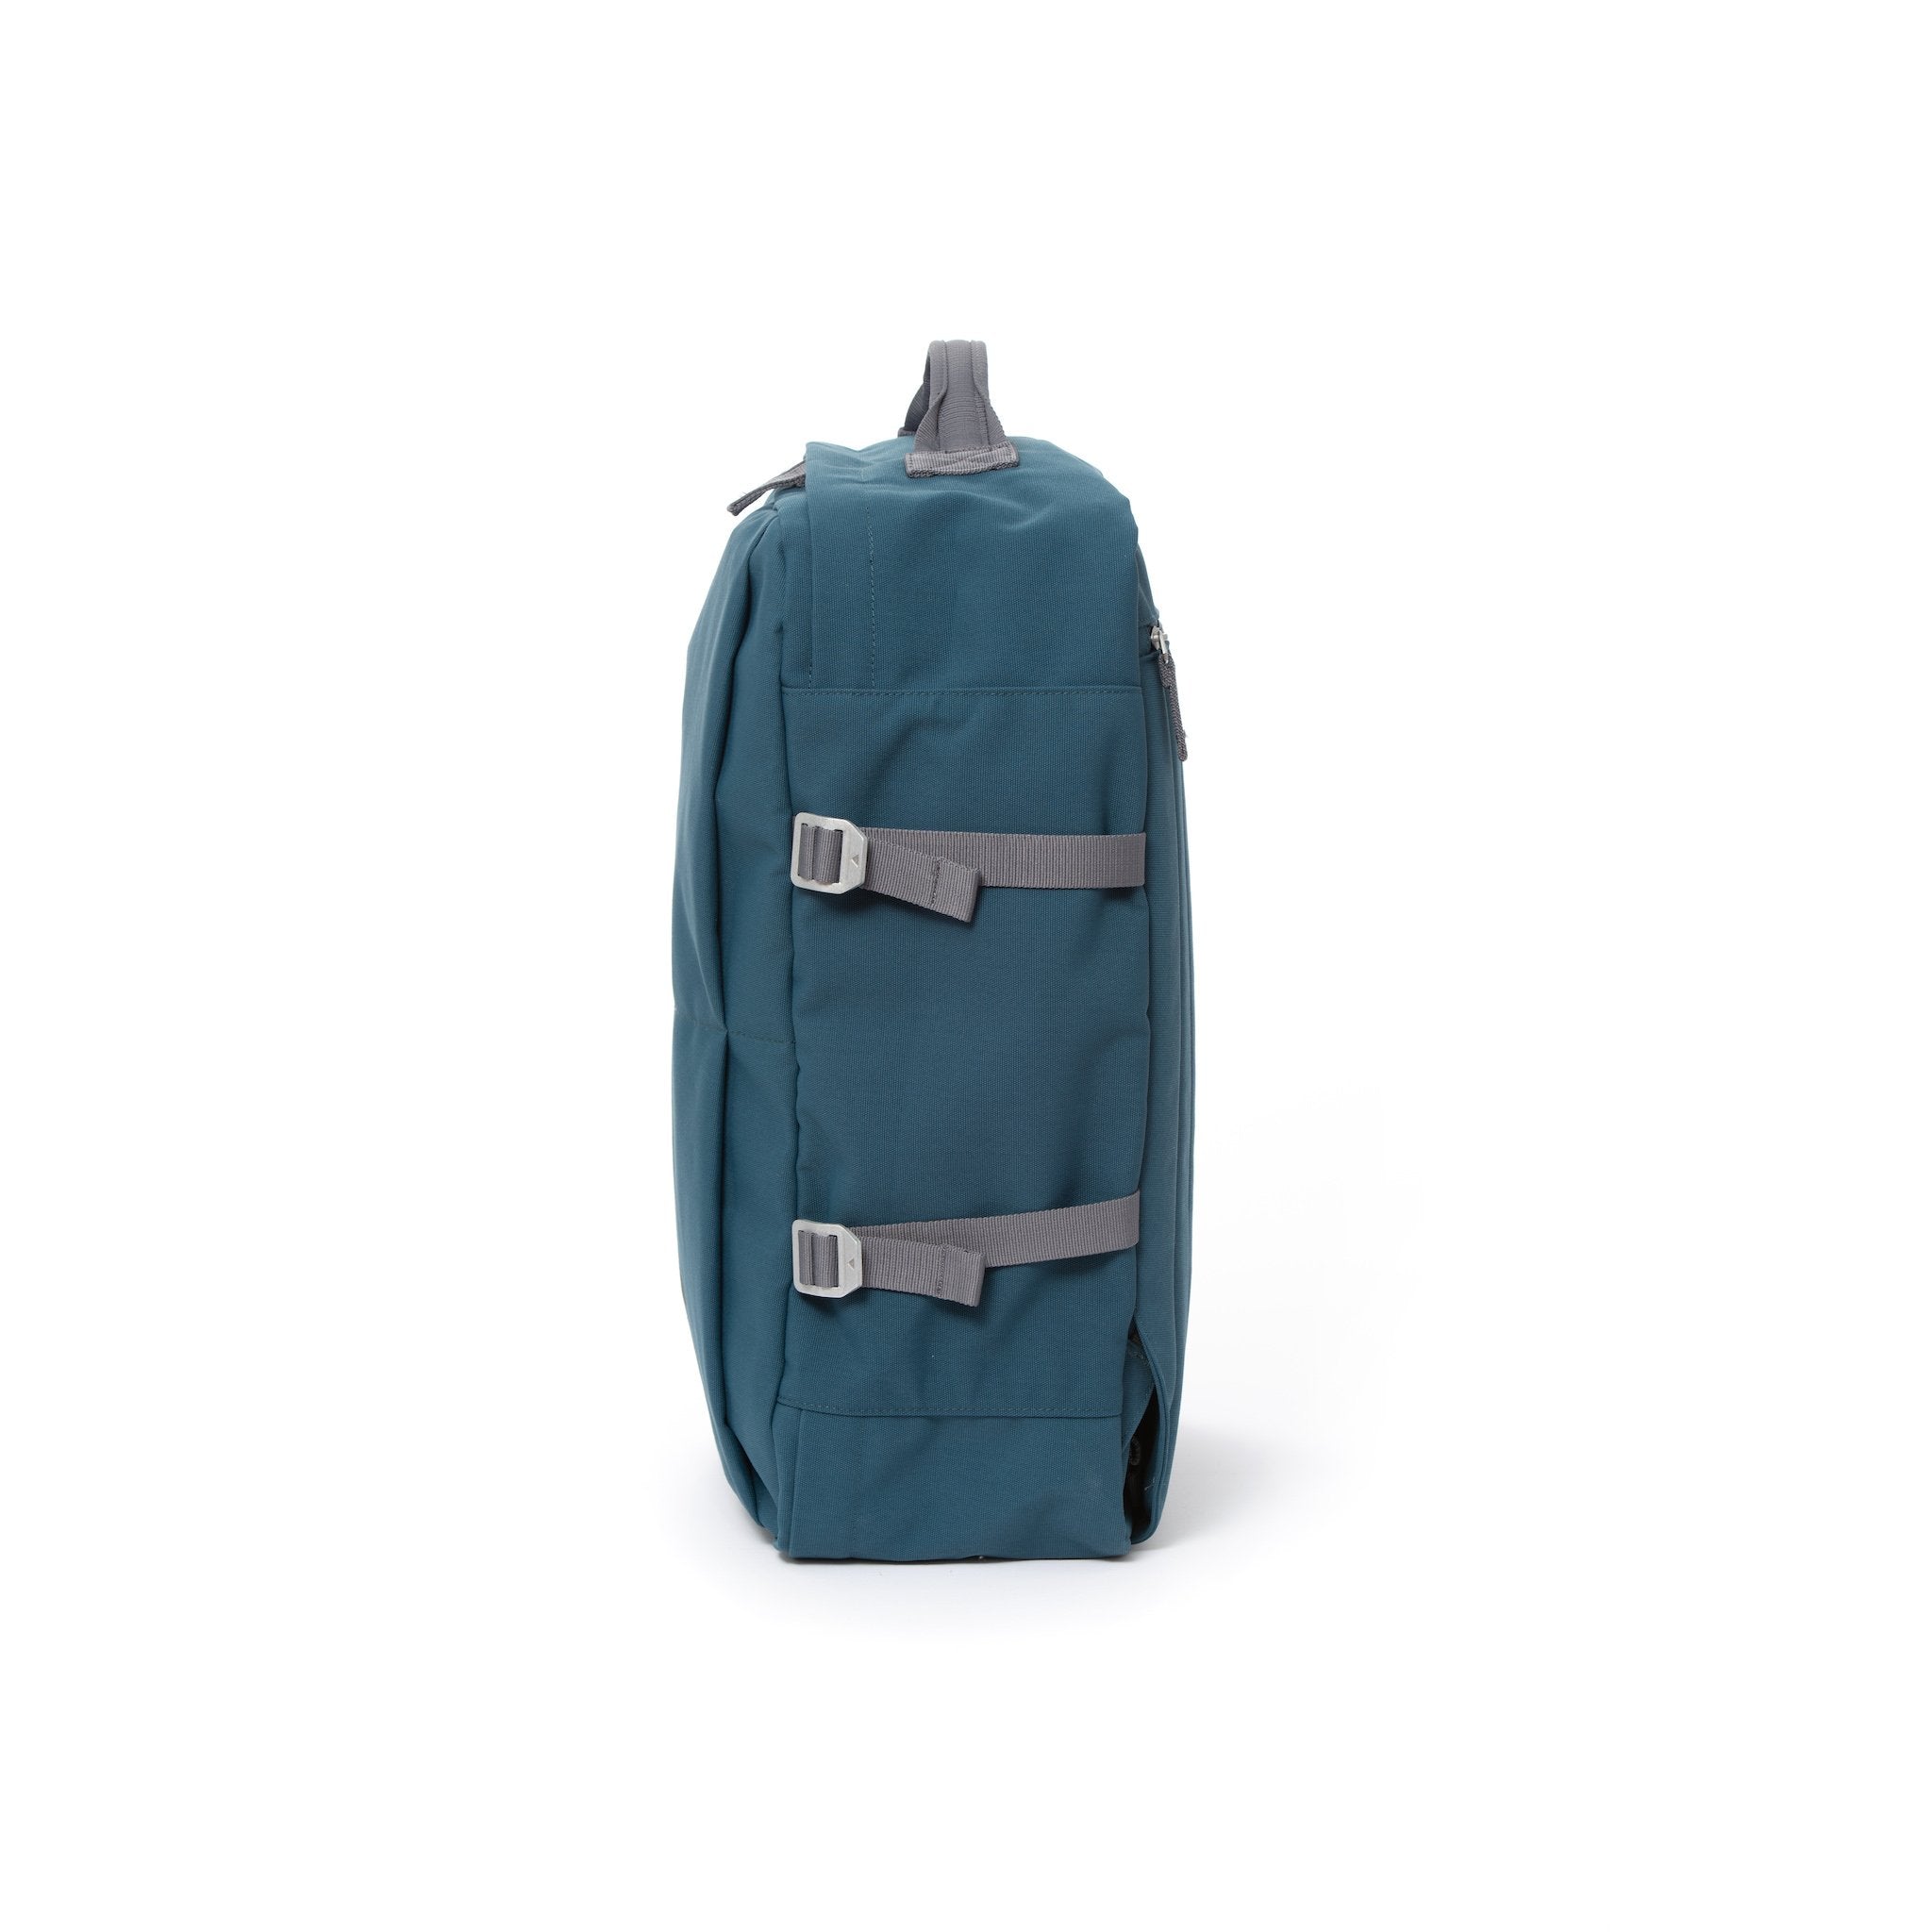 Blue waterproof canvas travel backpack with compression side straps.